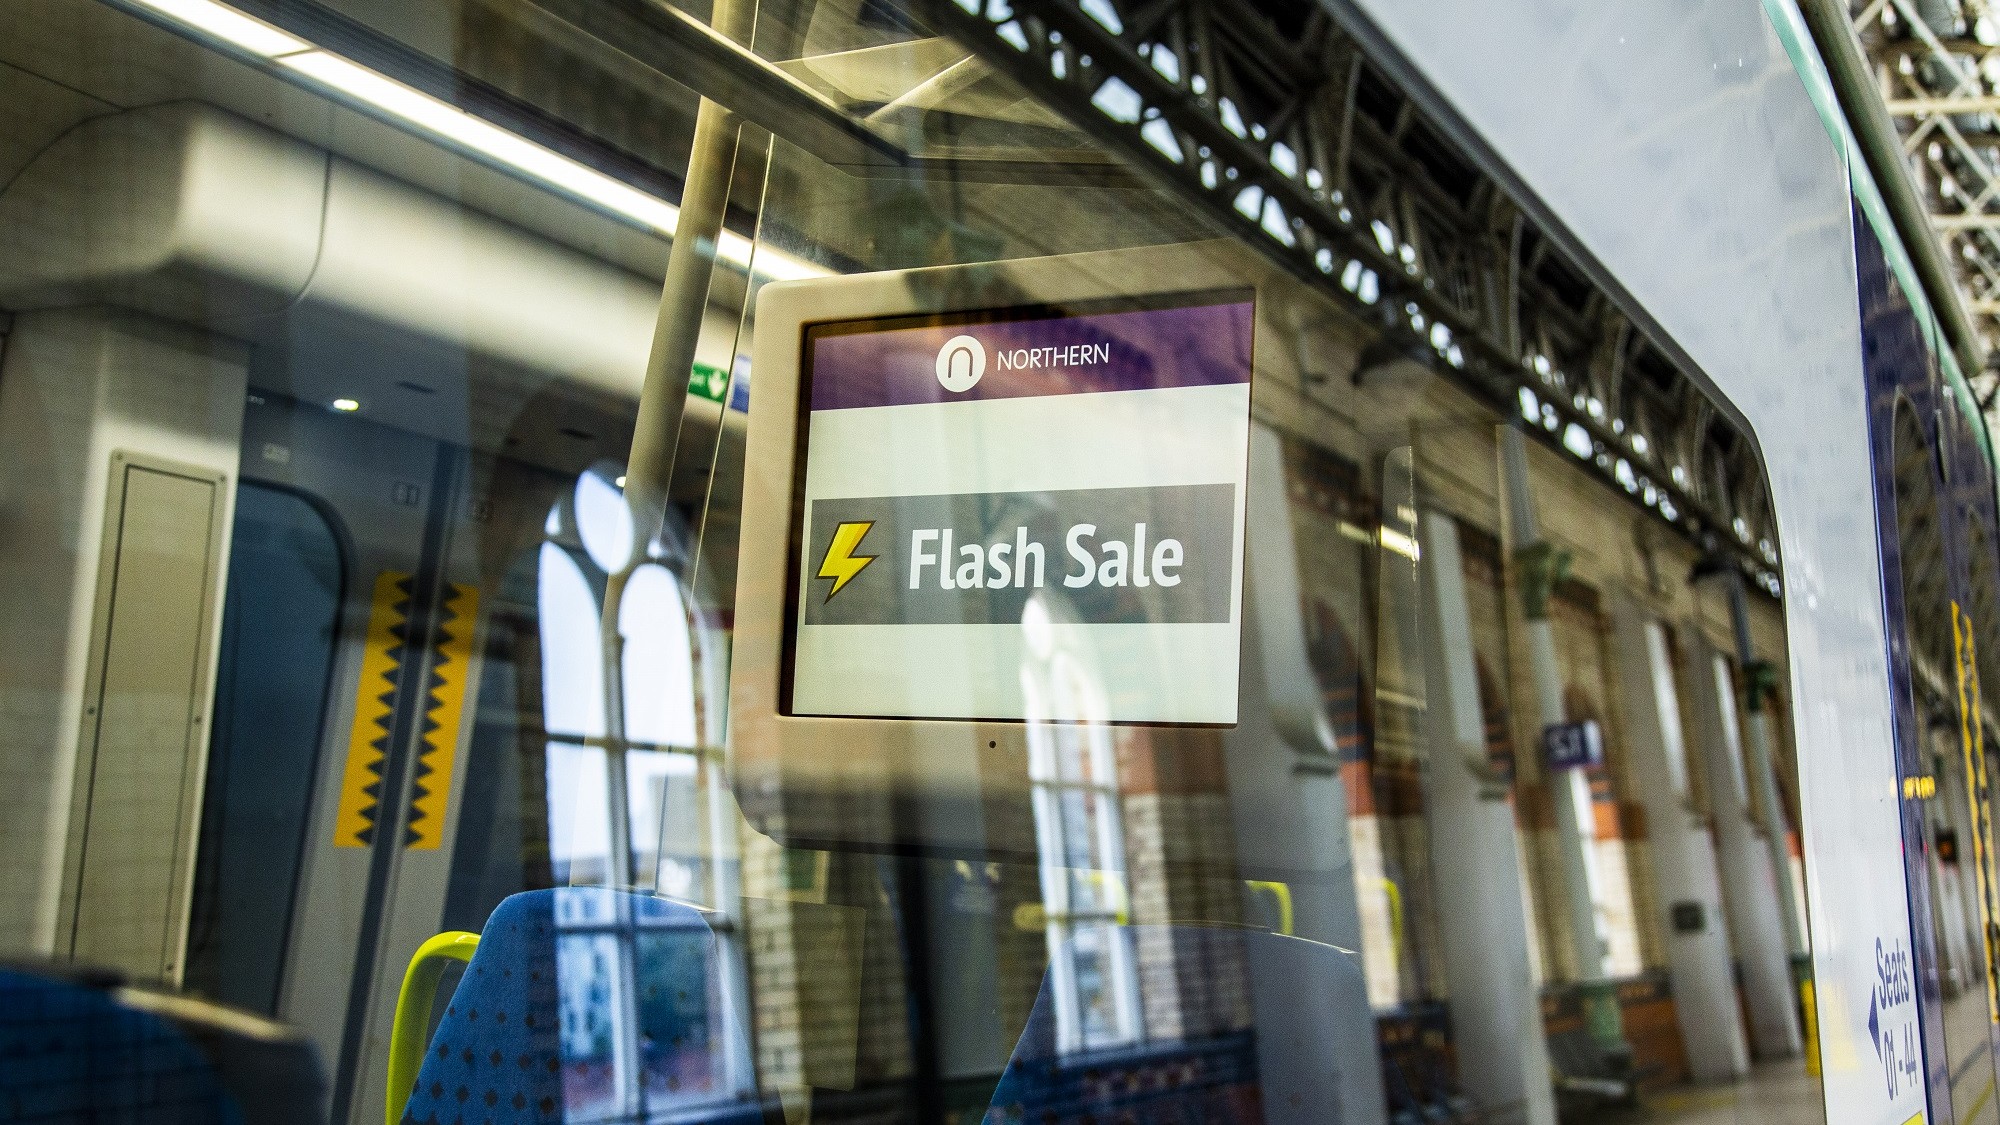 Image shows Flash Sale signage on-board Northern train